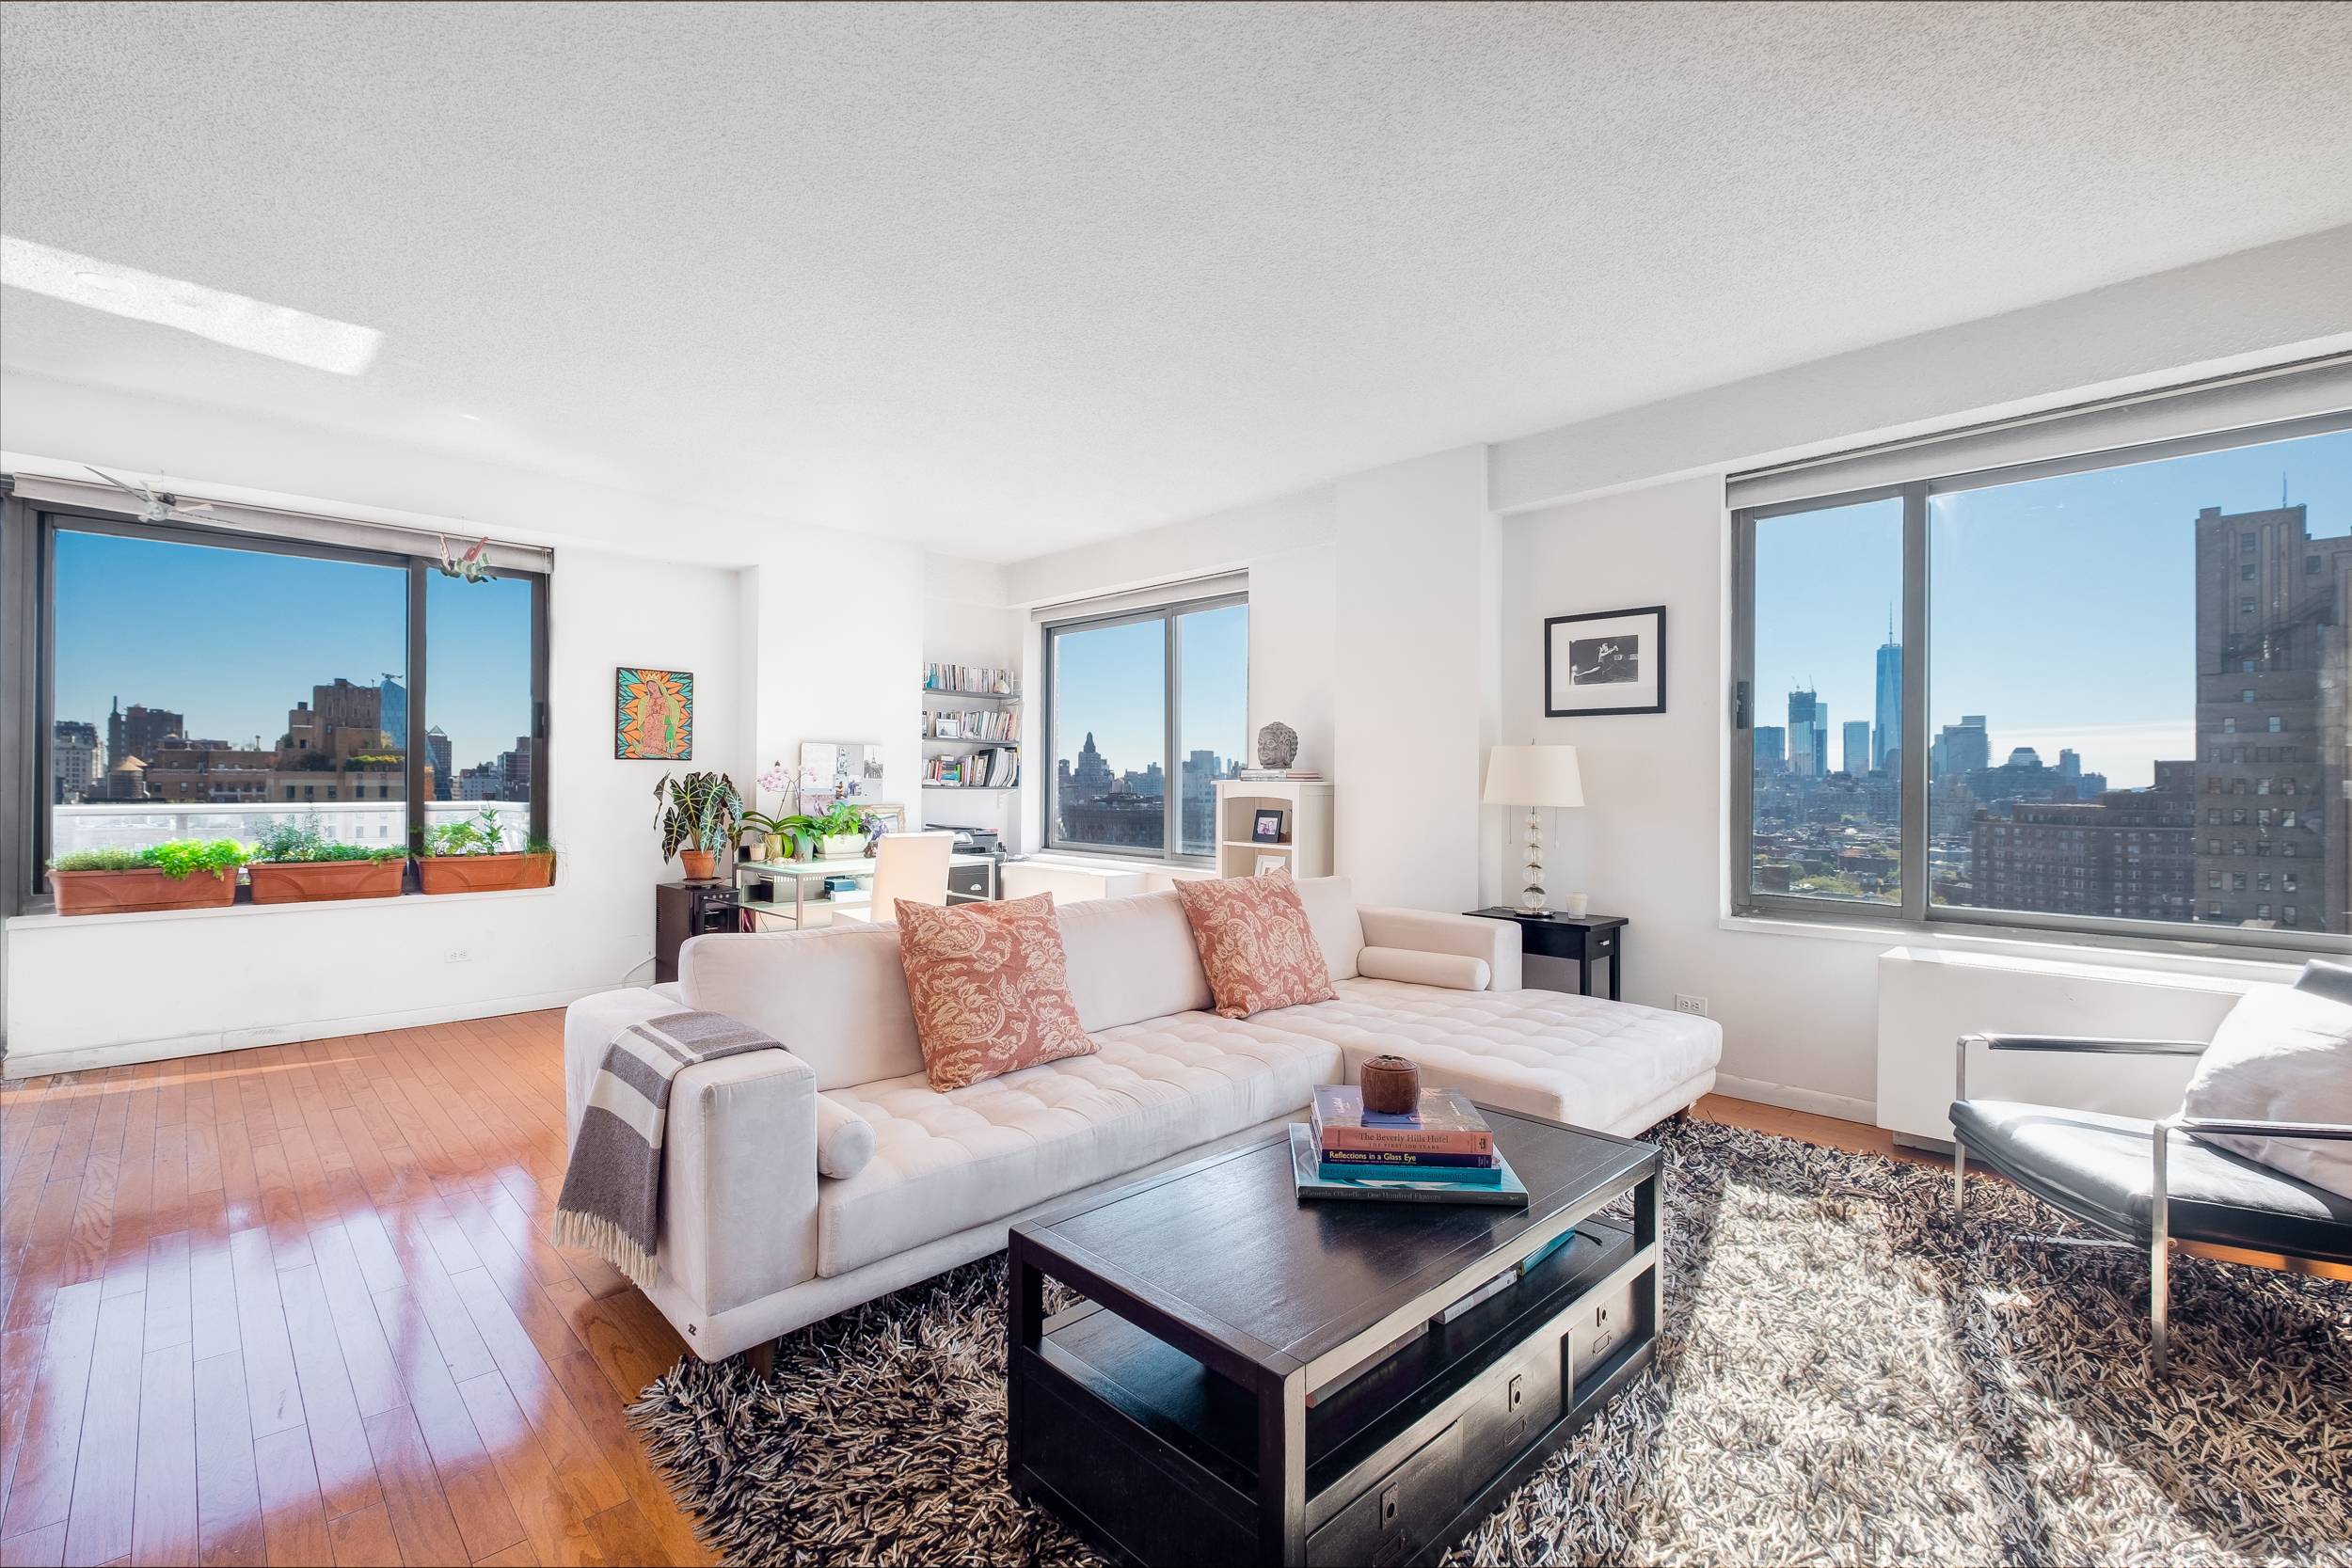 270 WEST 17TH STREET / SUBLIME AND SUPREME PRIME CHELSEA PENTHOUSE ONE BEDROOM/ PRIVATE BALCONY/ ENDLESS VIEWS